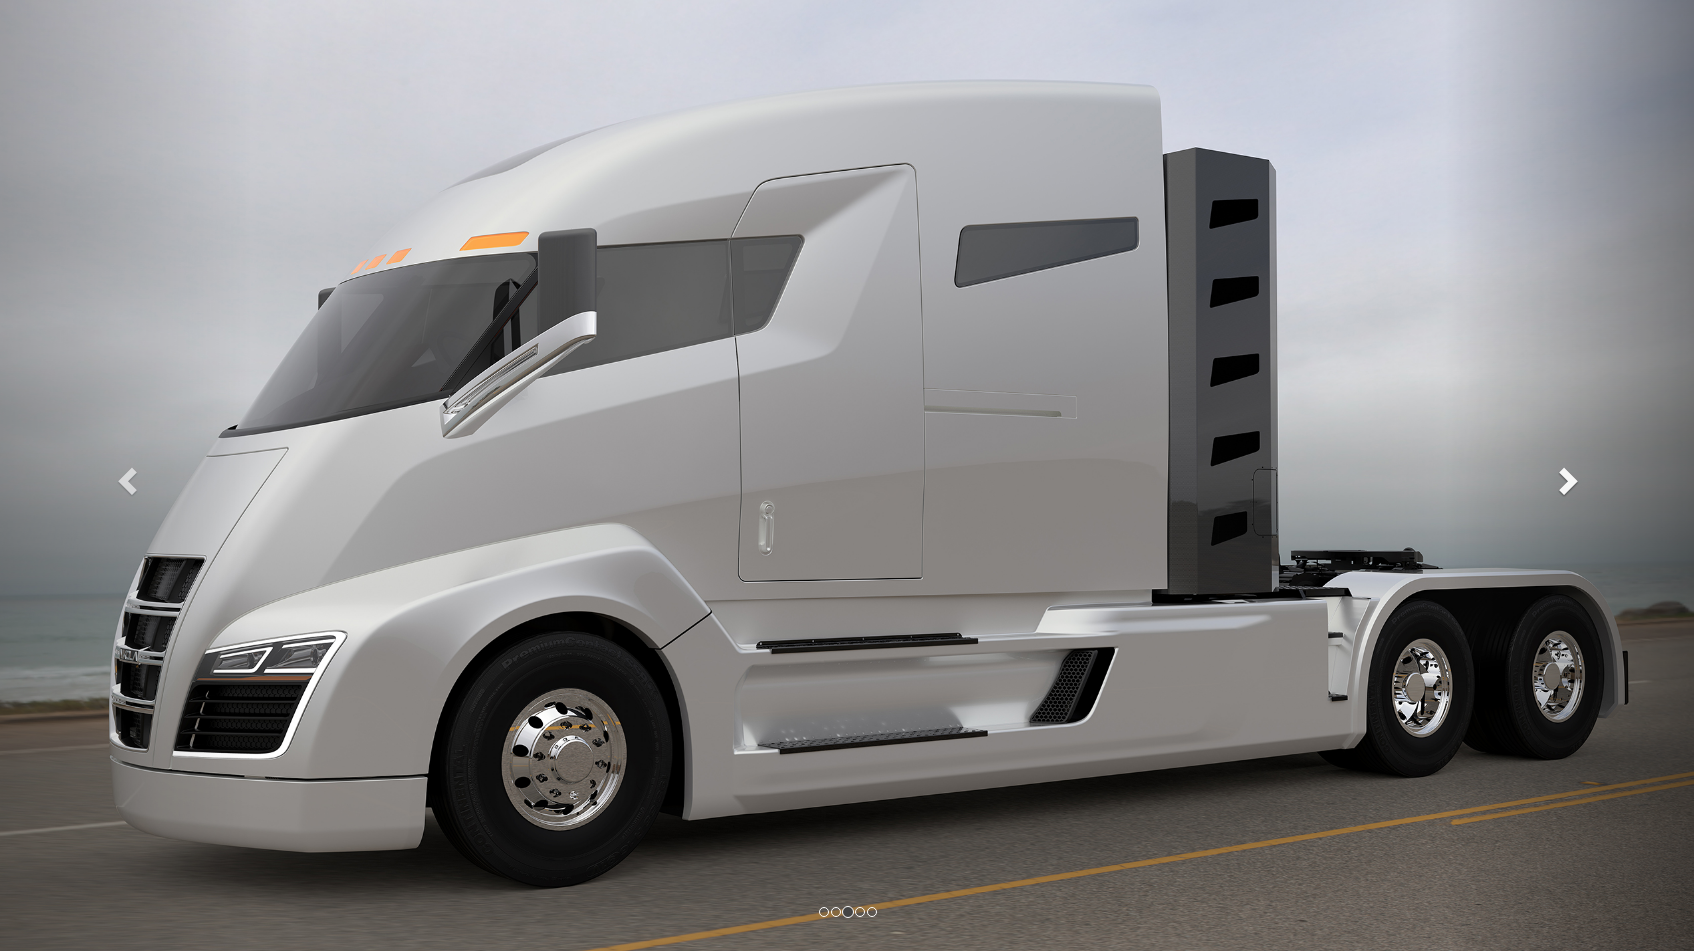 This 2,000-HP Tractor Trailer Is The World's Most Beautiful Big Rig - Maxim